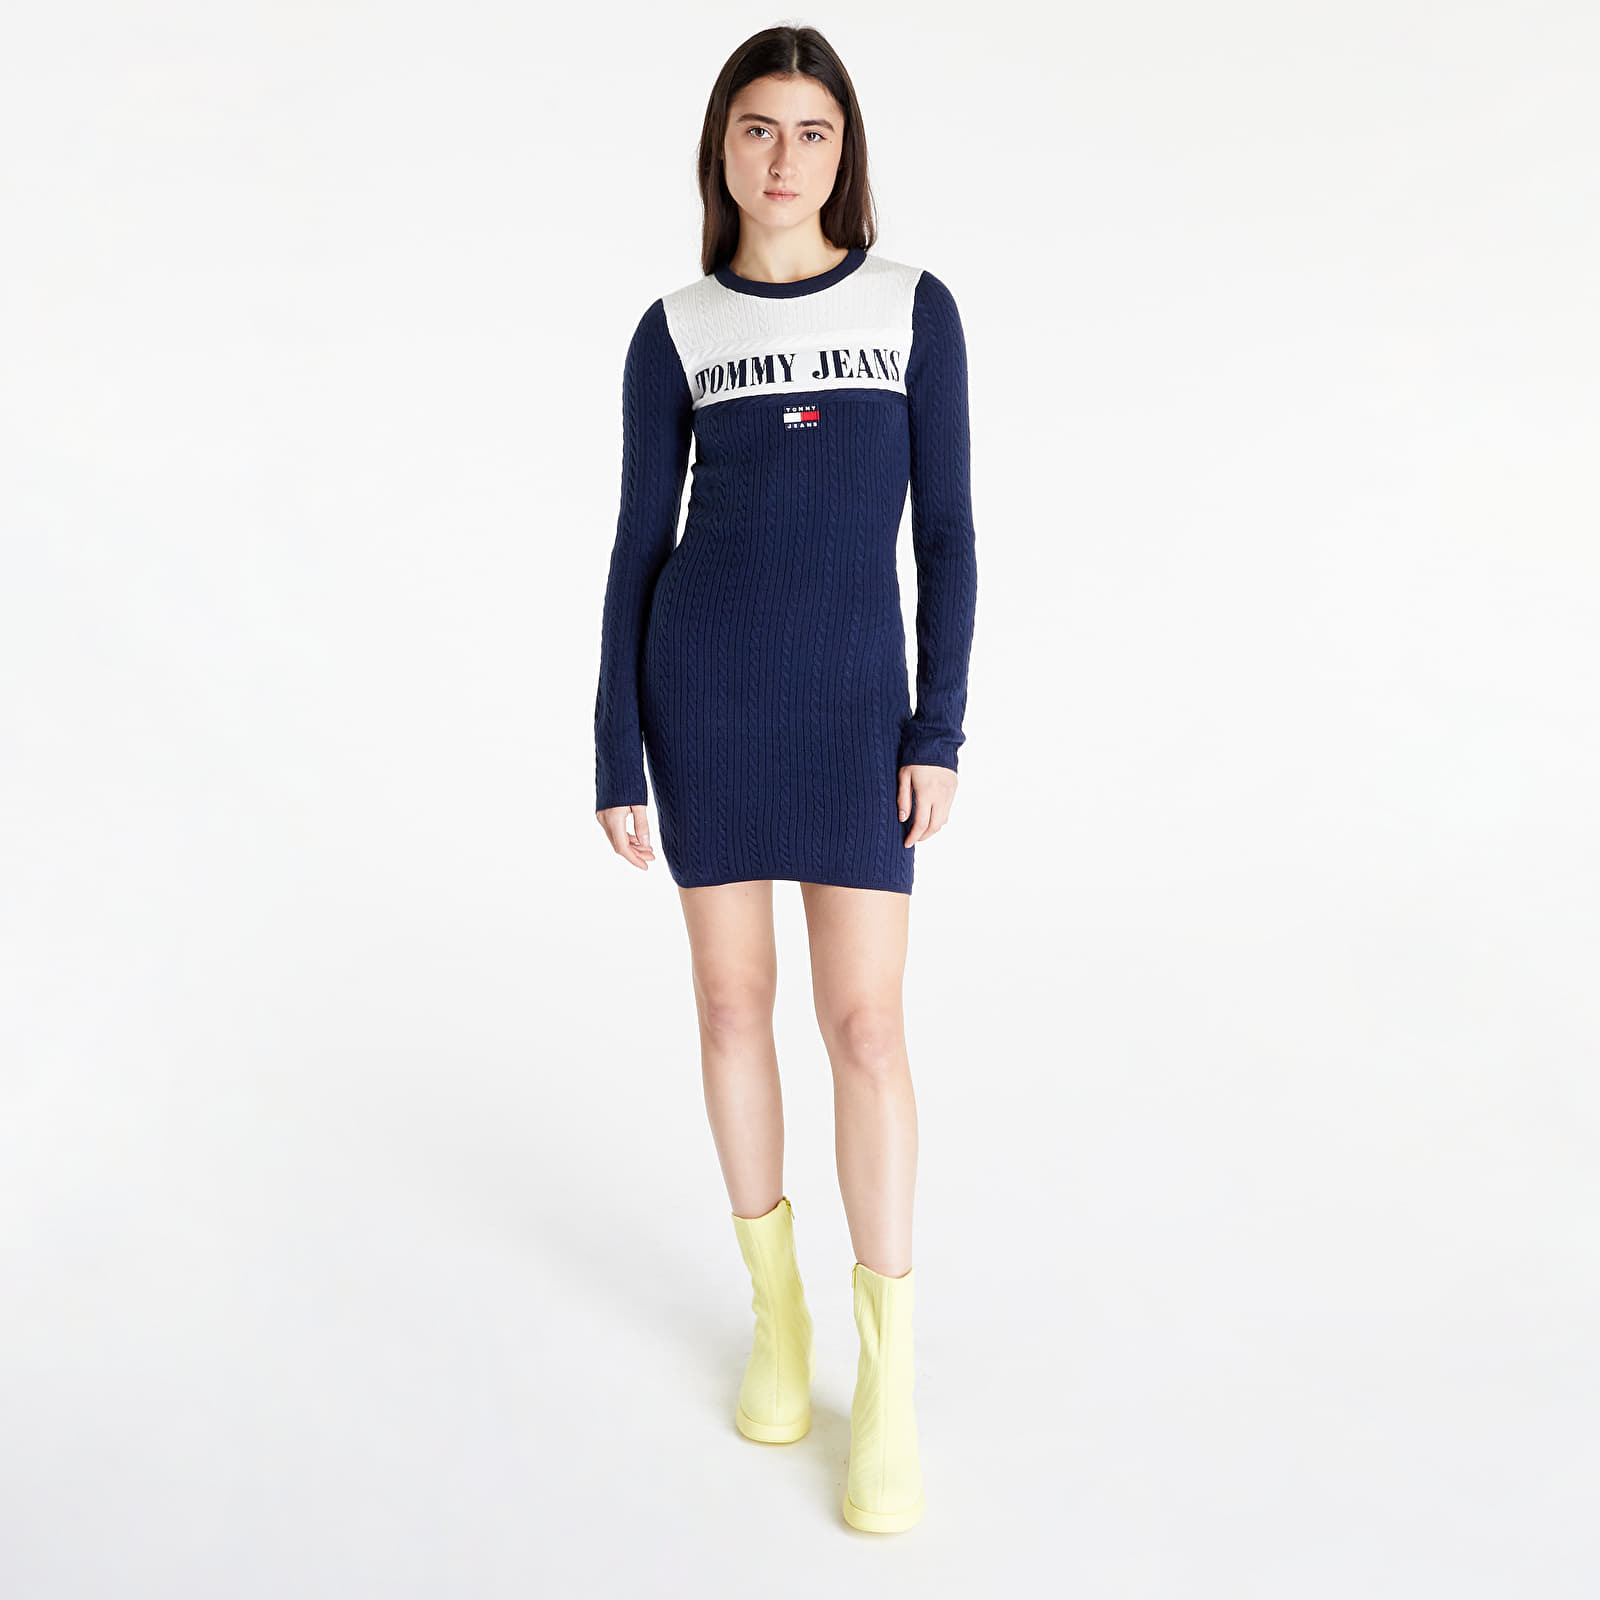 TOMMY JEANS Archive 1 Sweater Dress Twilight Navy